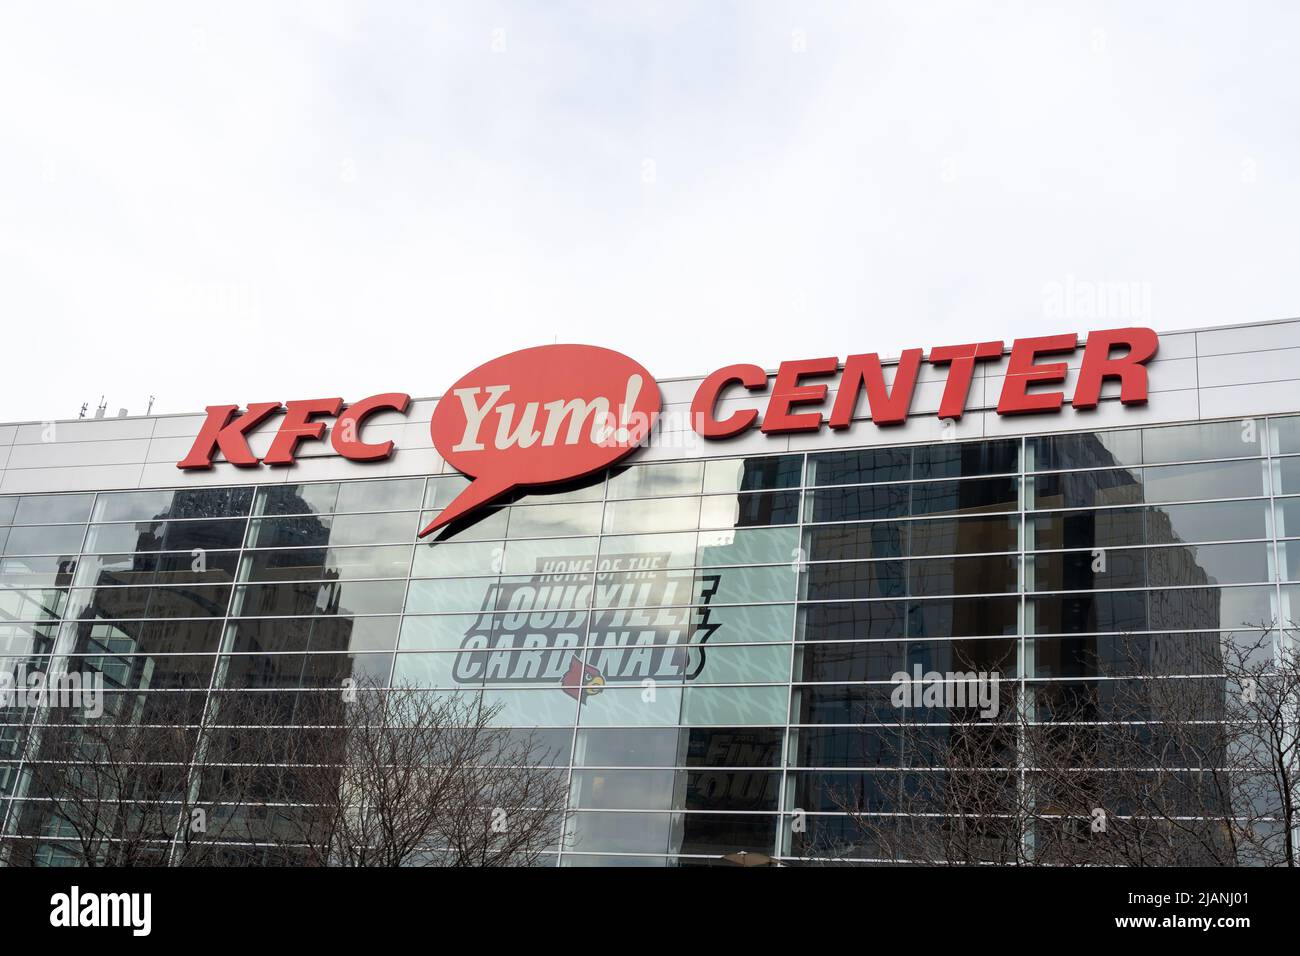 Louisville, KY, USA - December 28, 2021: Closeup of KFC Yum! Center sign is shown in Louisville, KY, USA. Stock Photo